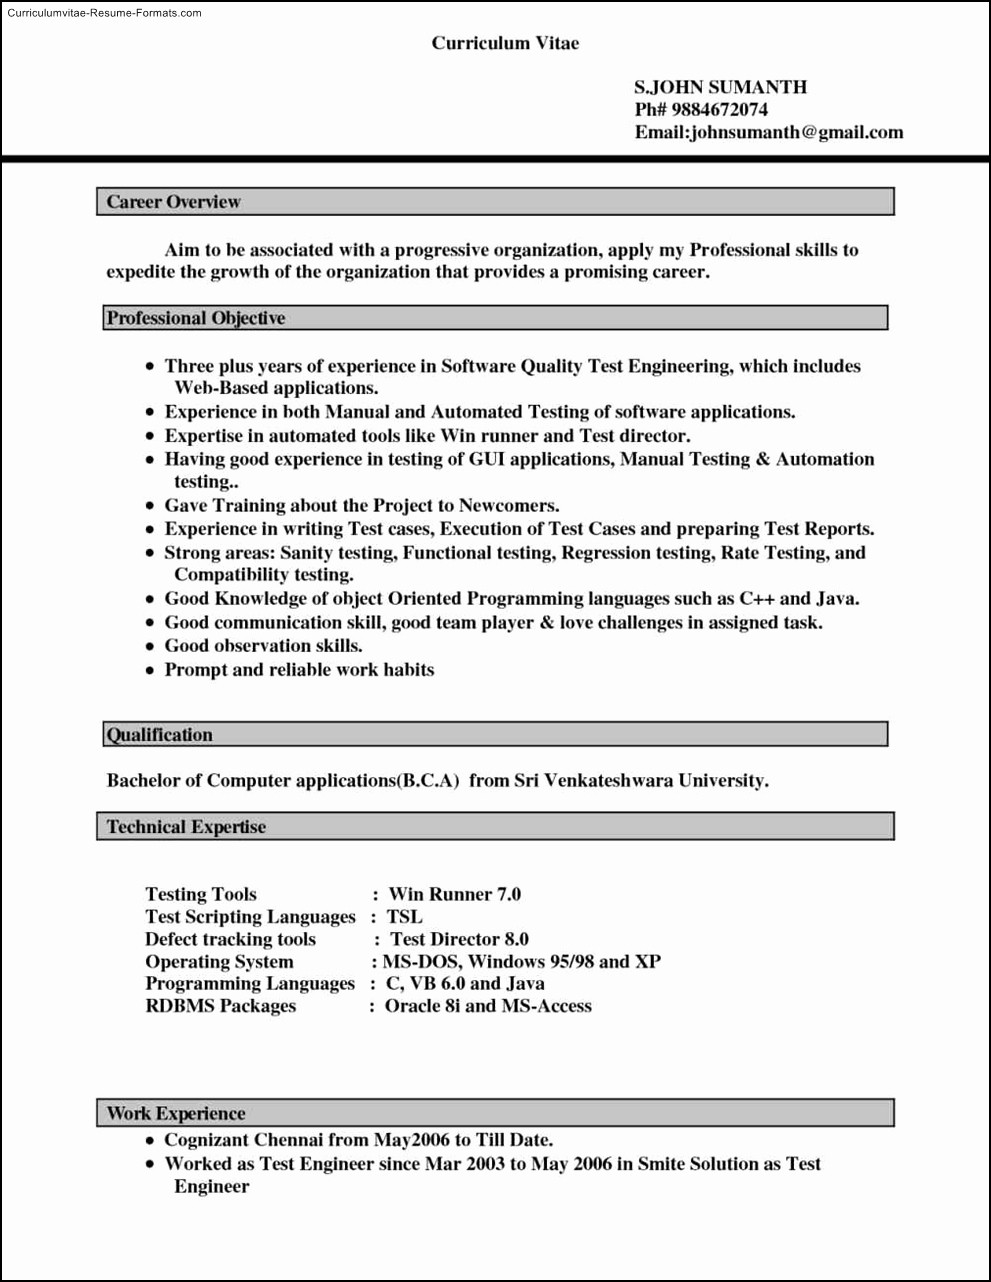 Resumes On Microsoft Word 2007 Best Of Free Resume Templates for Microsoft Word 2007 Free